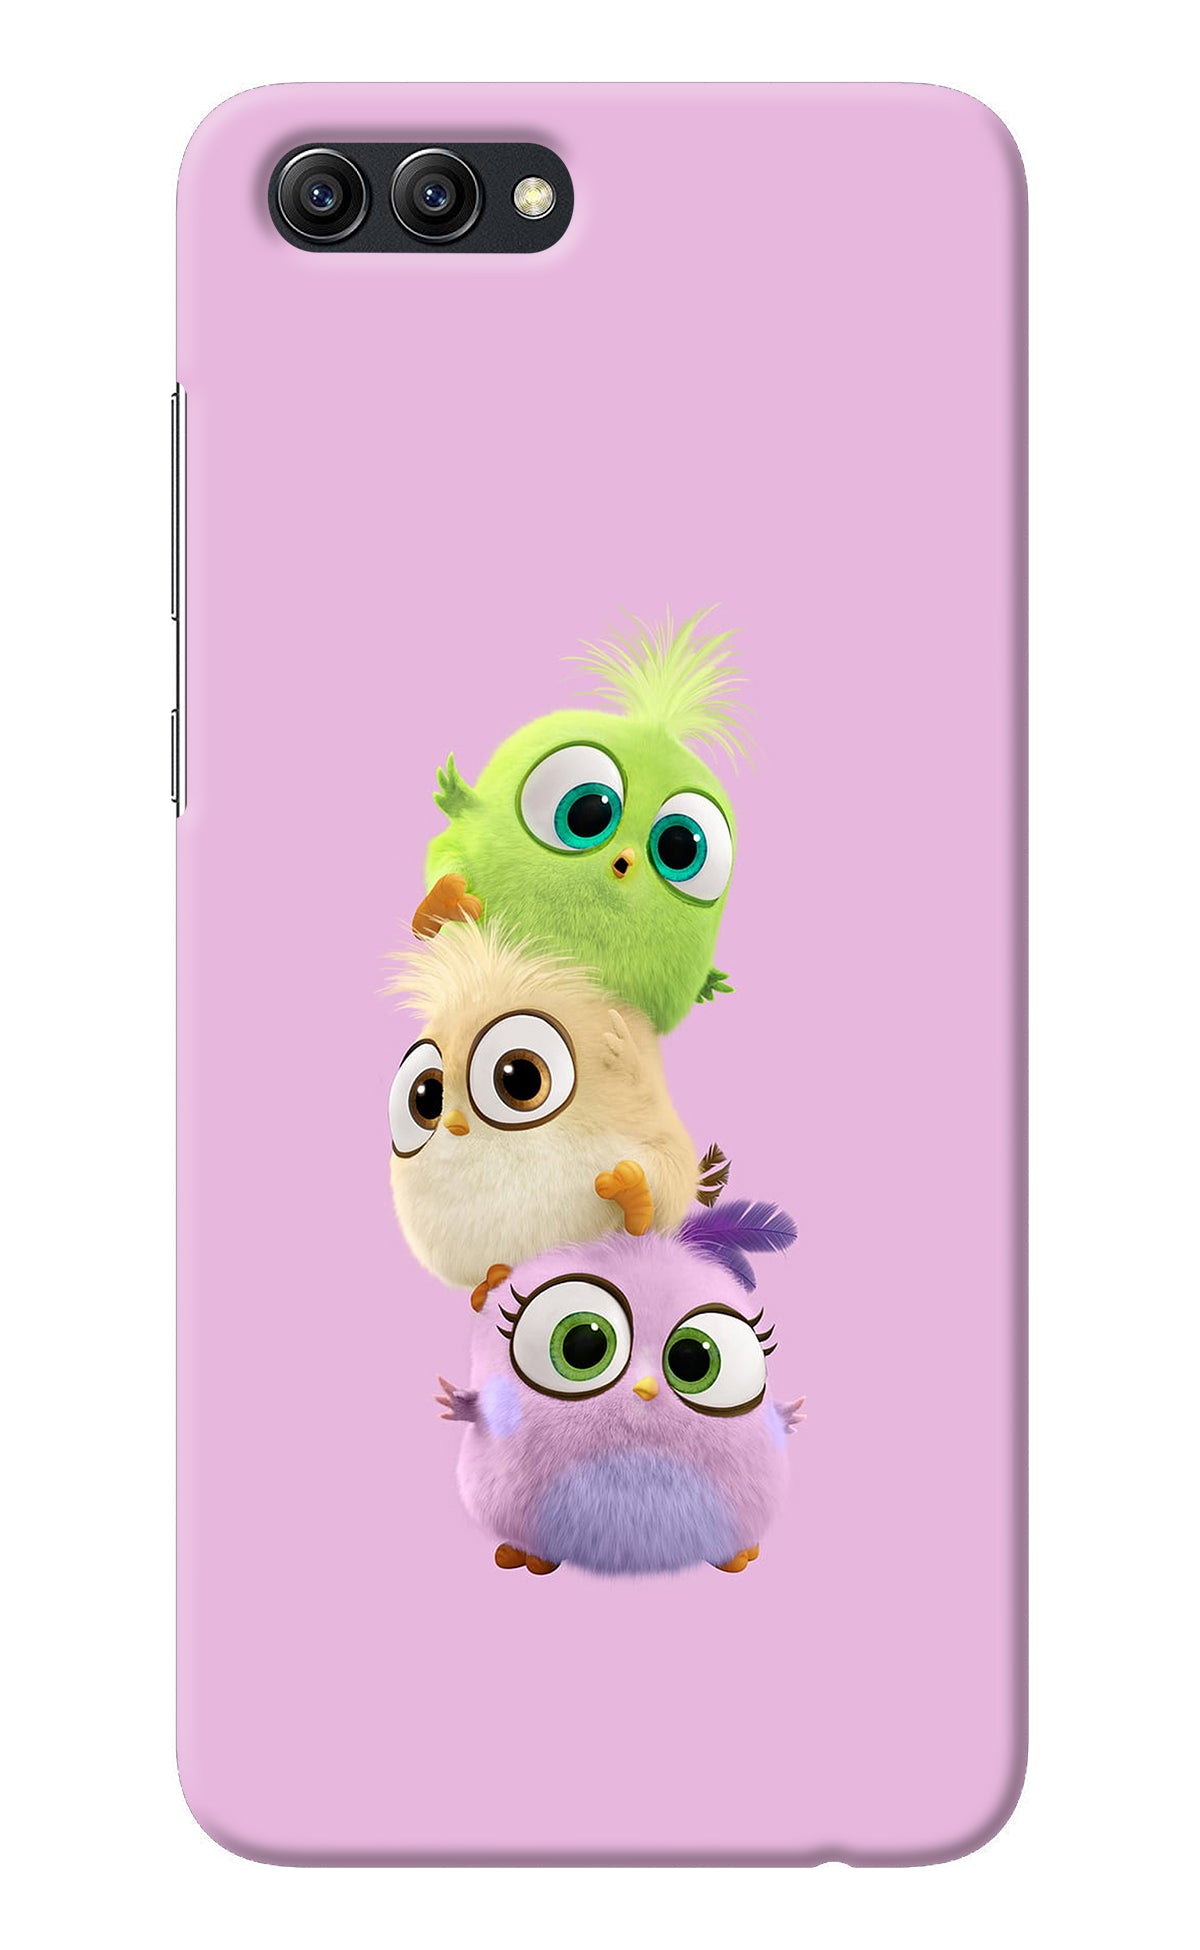 Cute Little Birds Honor View 10 Back Cover